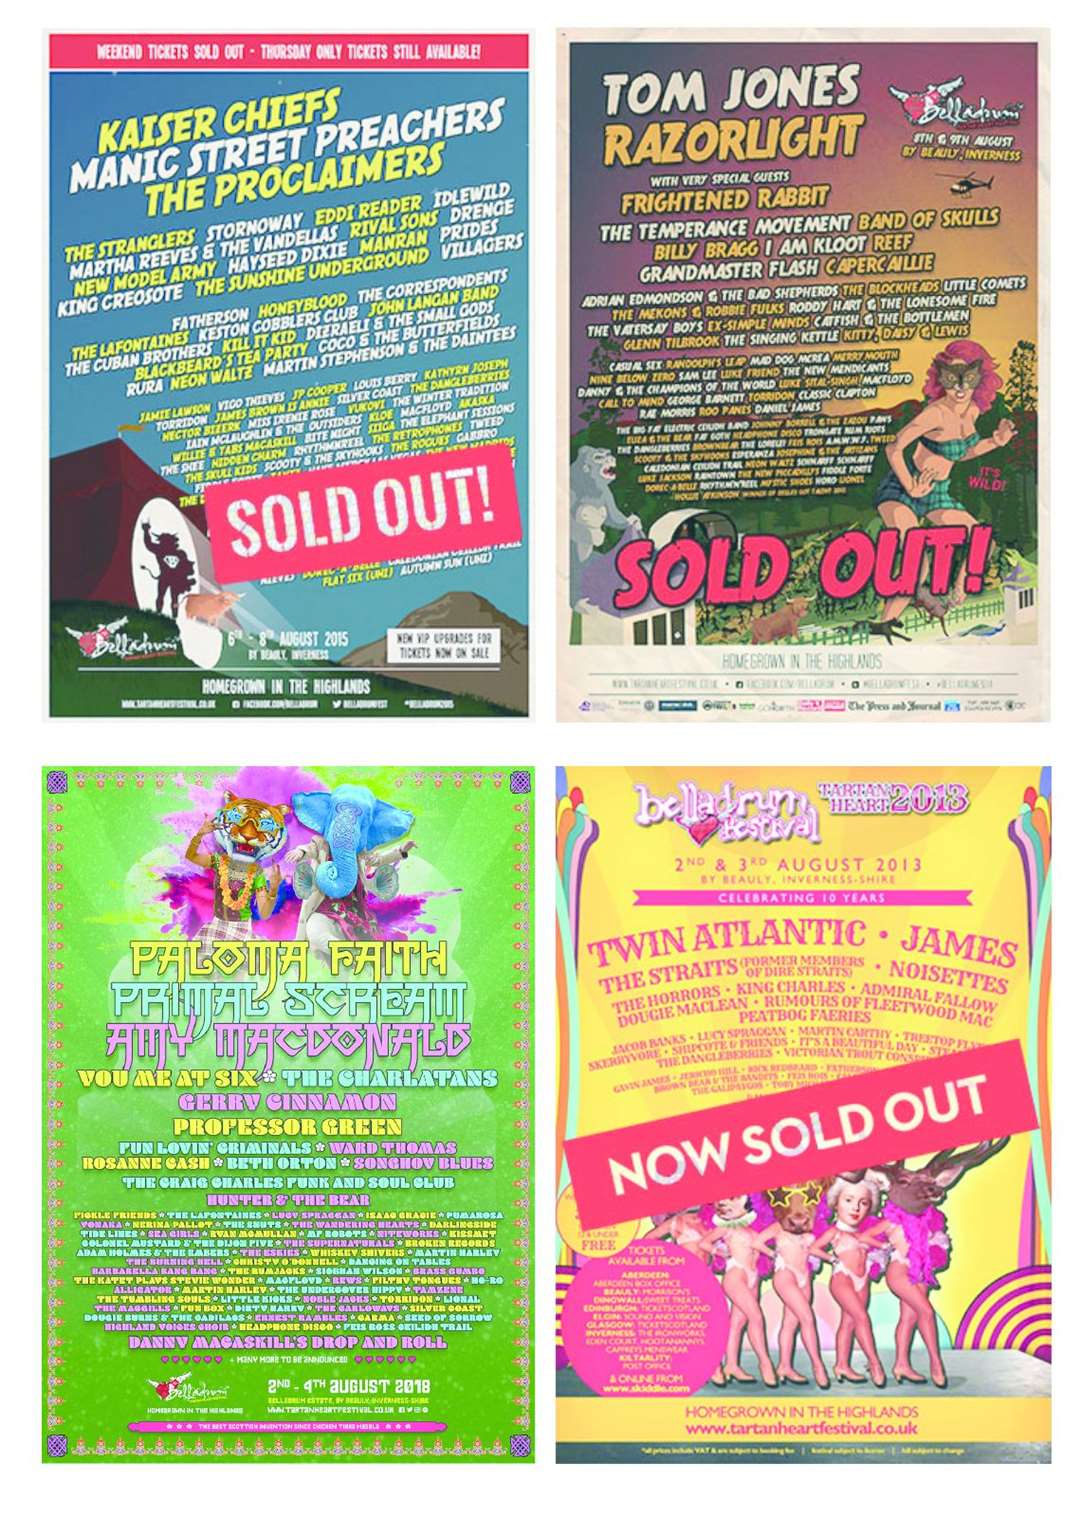 Some of the great posters from previous Belladrum festivals.